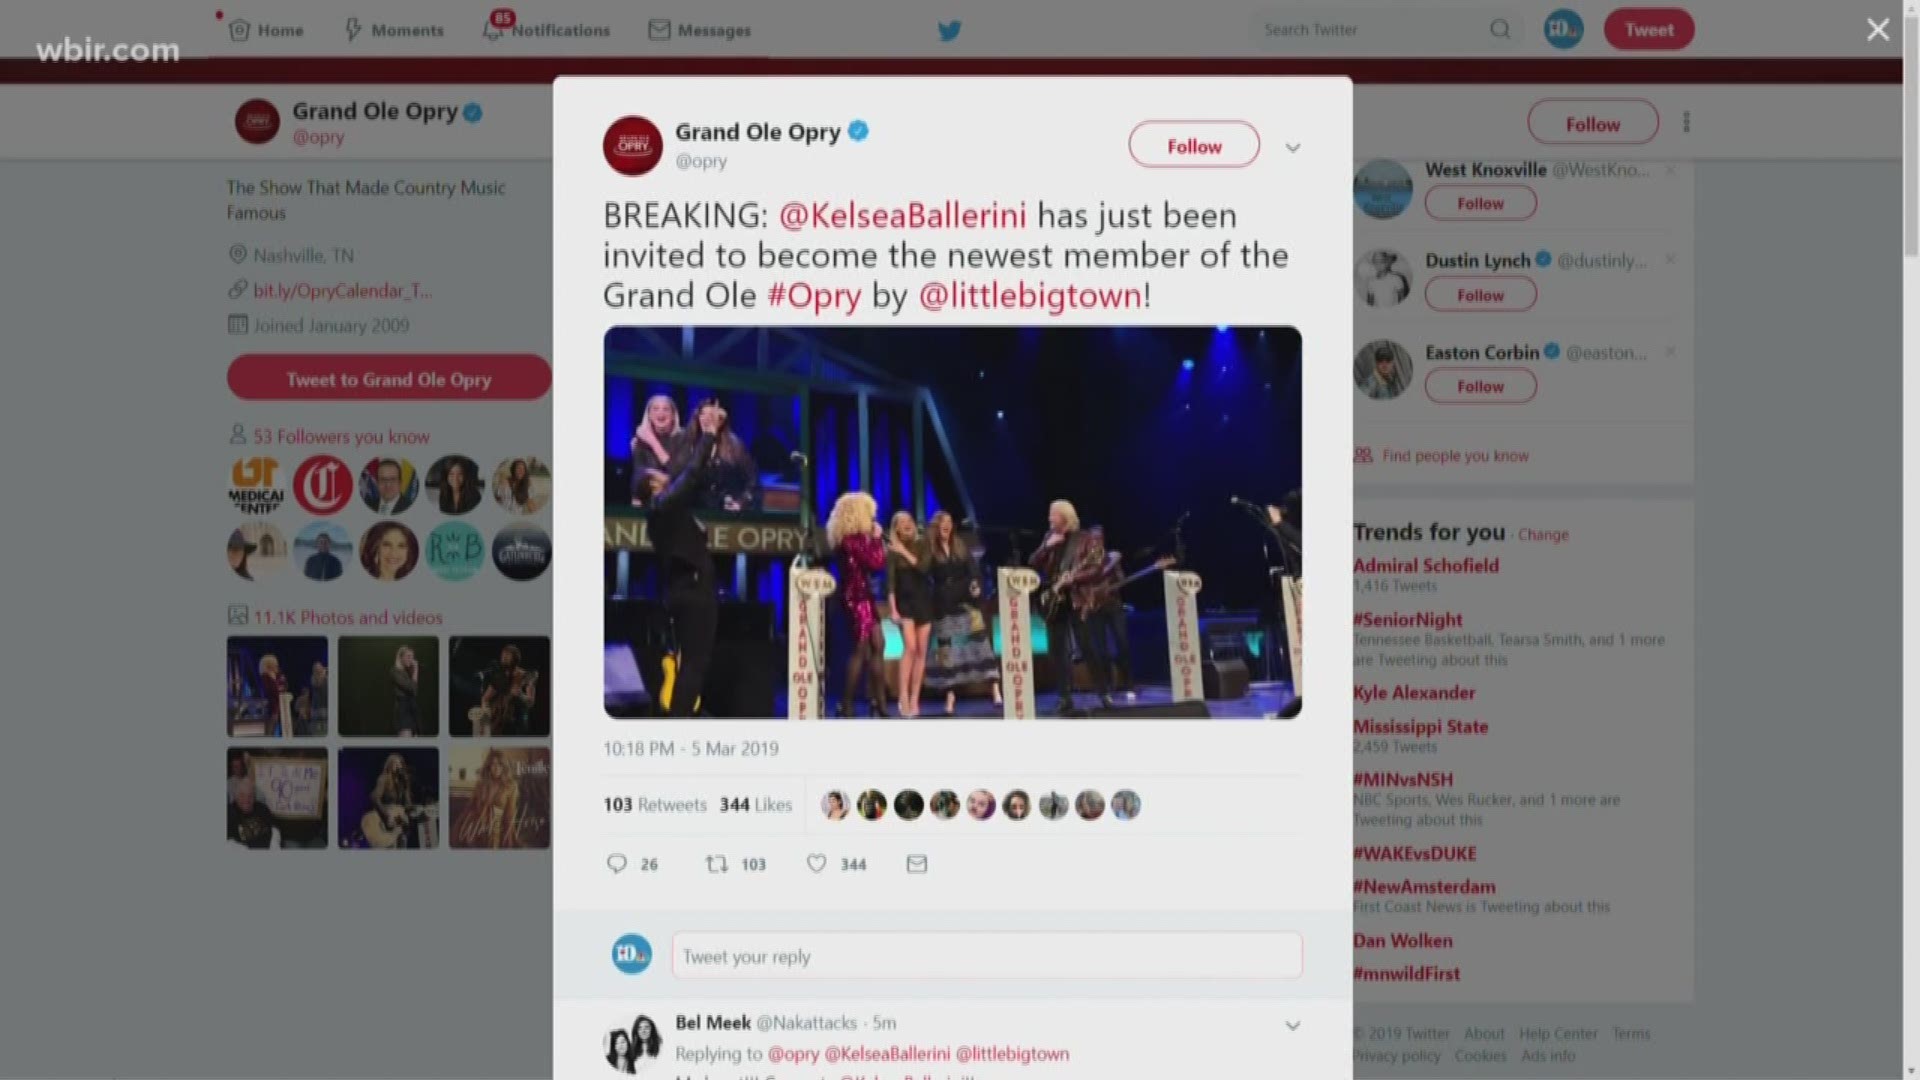 A group performance with Little Big Town on Tuesday night turned into a huge surprise for Kelsea Ballerini.